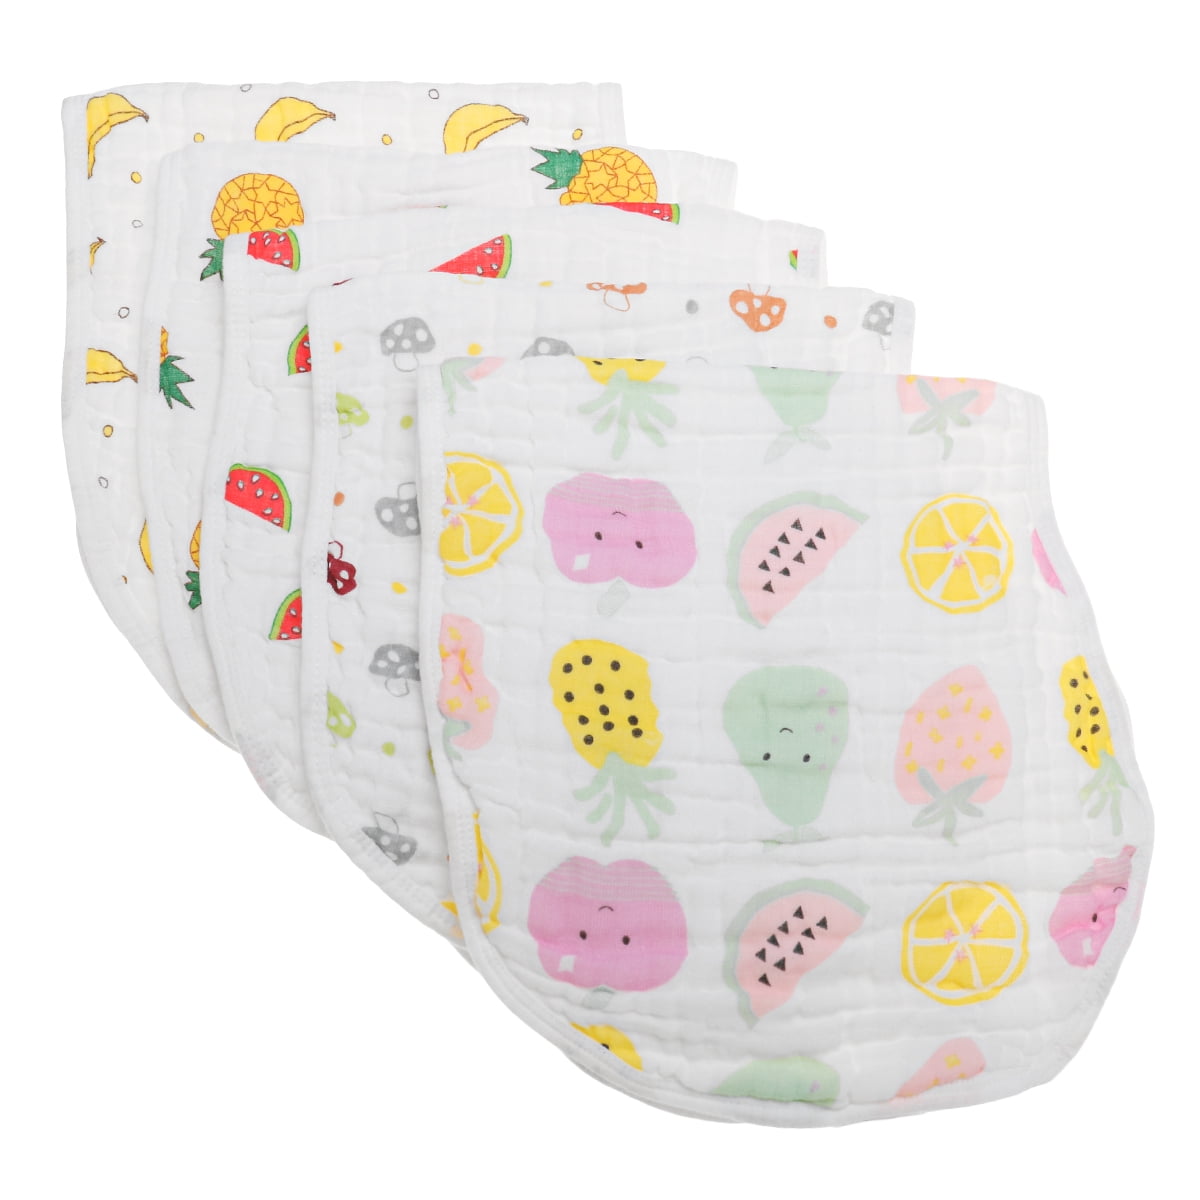 Muslin Baby Burp Cloths 6 Pack Burp Cloth Sets for Unisex 20 by 10 Inches 6 Layers Baby Burping Rags for Boys and Girls 